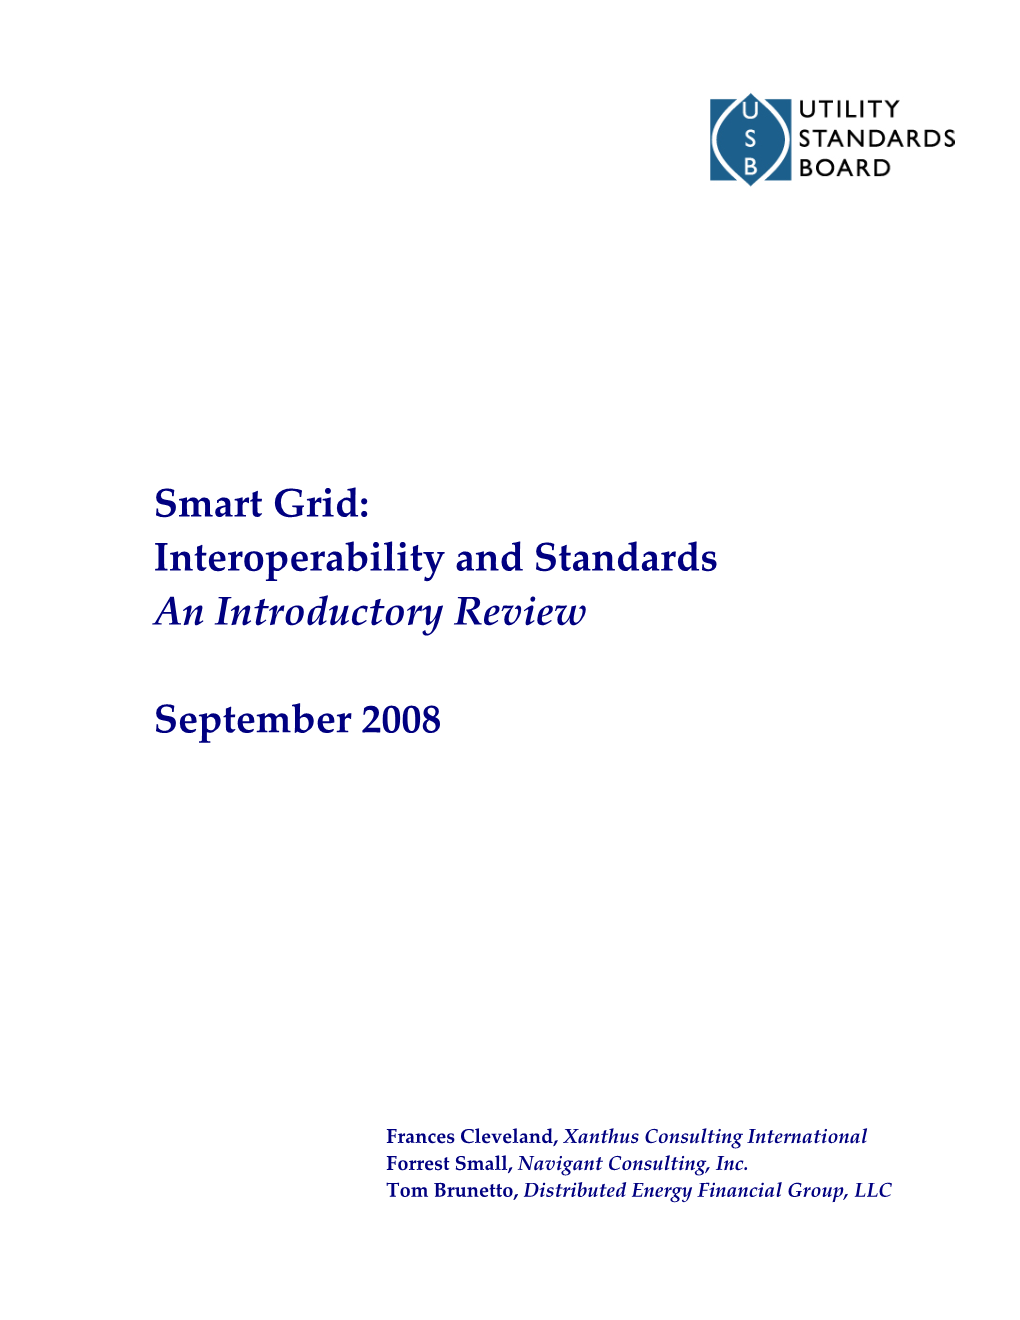 Smart Grid: Interoperability and Standards an Introductory Review